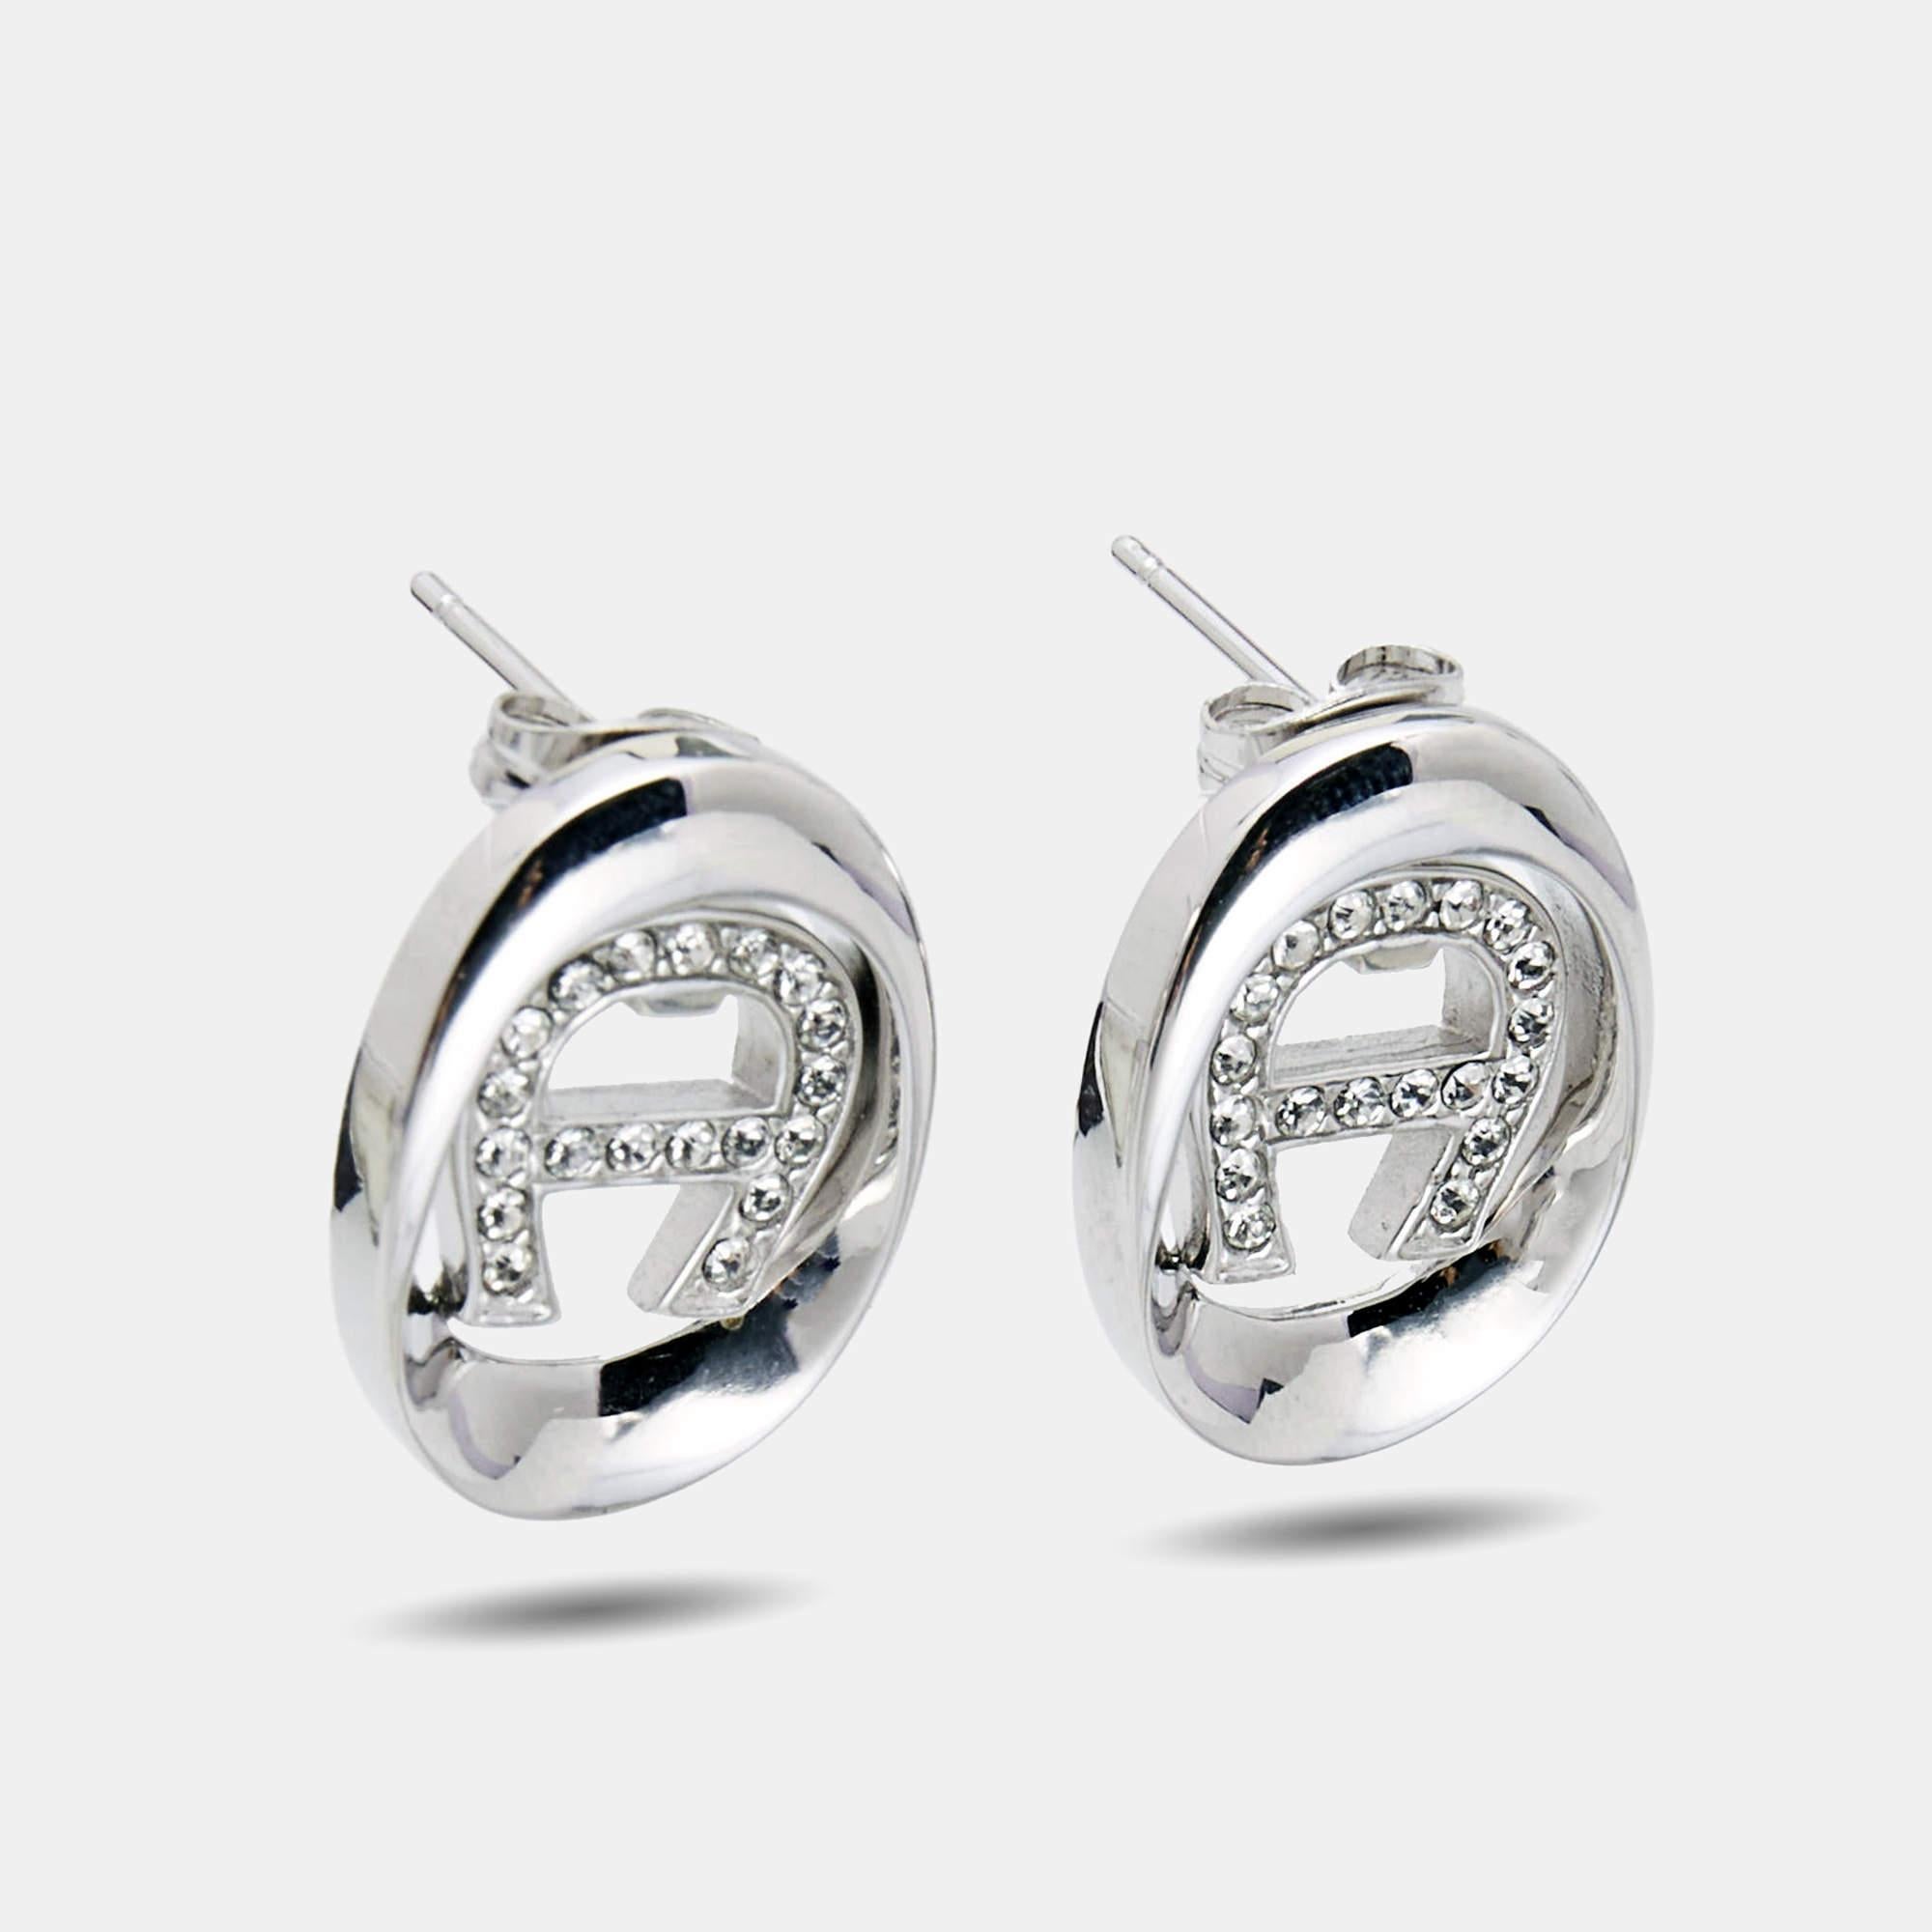 Simple and elegant, this Aigner pair of earrings features the brand logo in silver-tone metal, with crystals. The pair will add that charming factor to any stylish edit.

Includes: Original Box, Original Pouch

